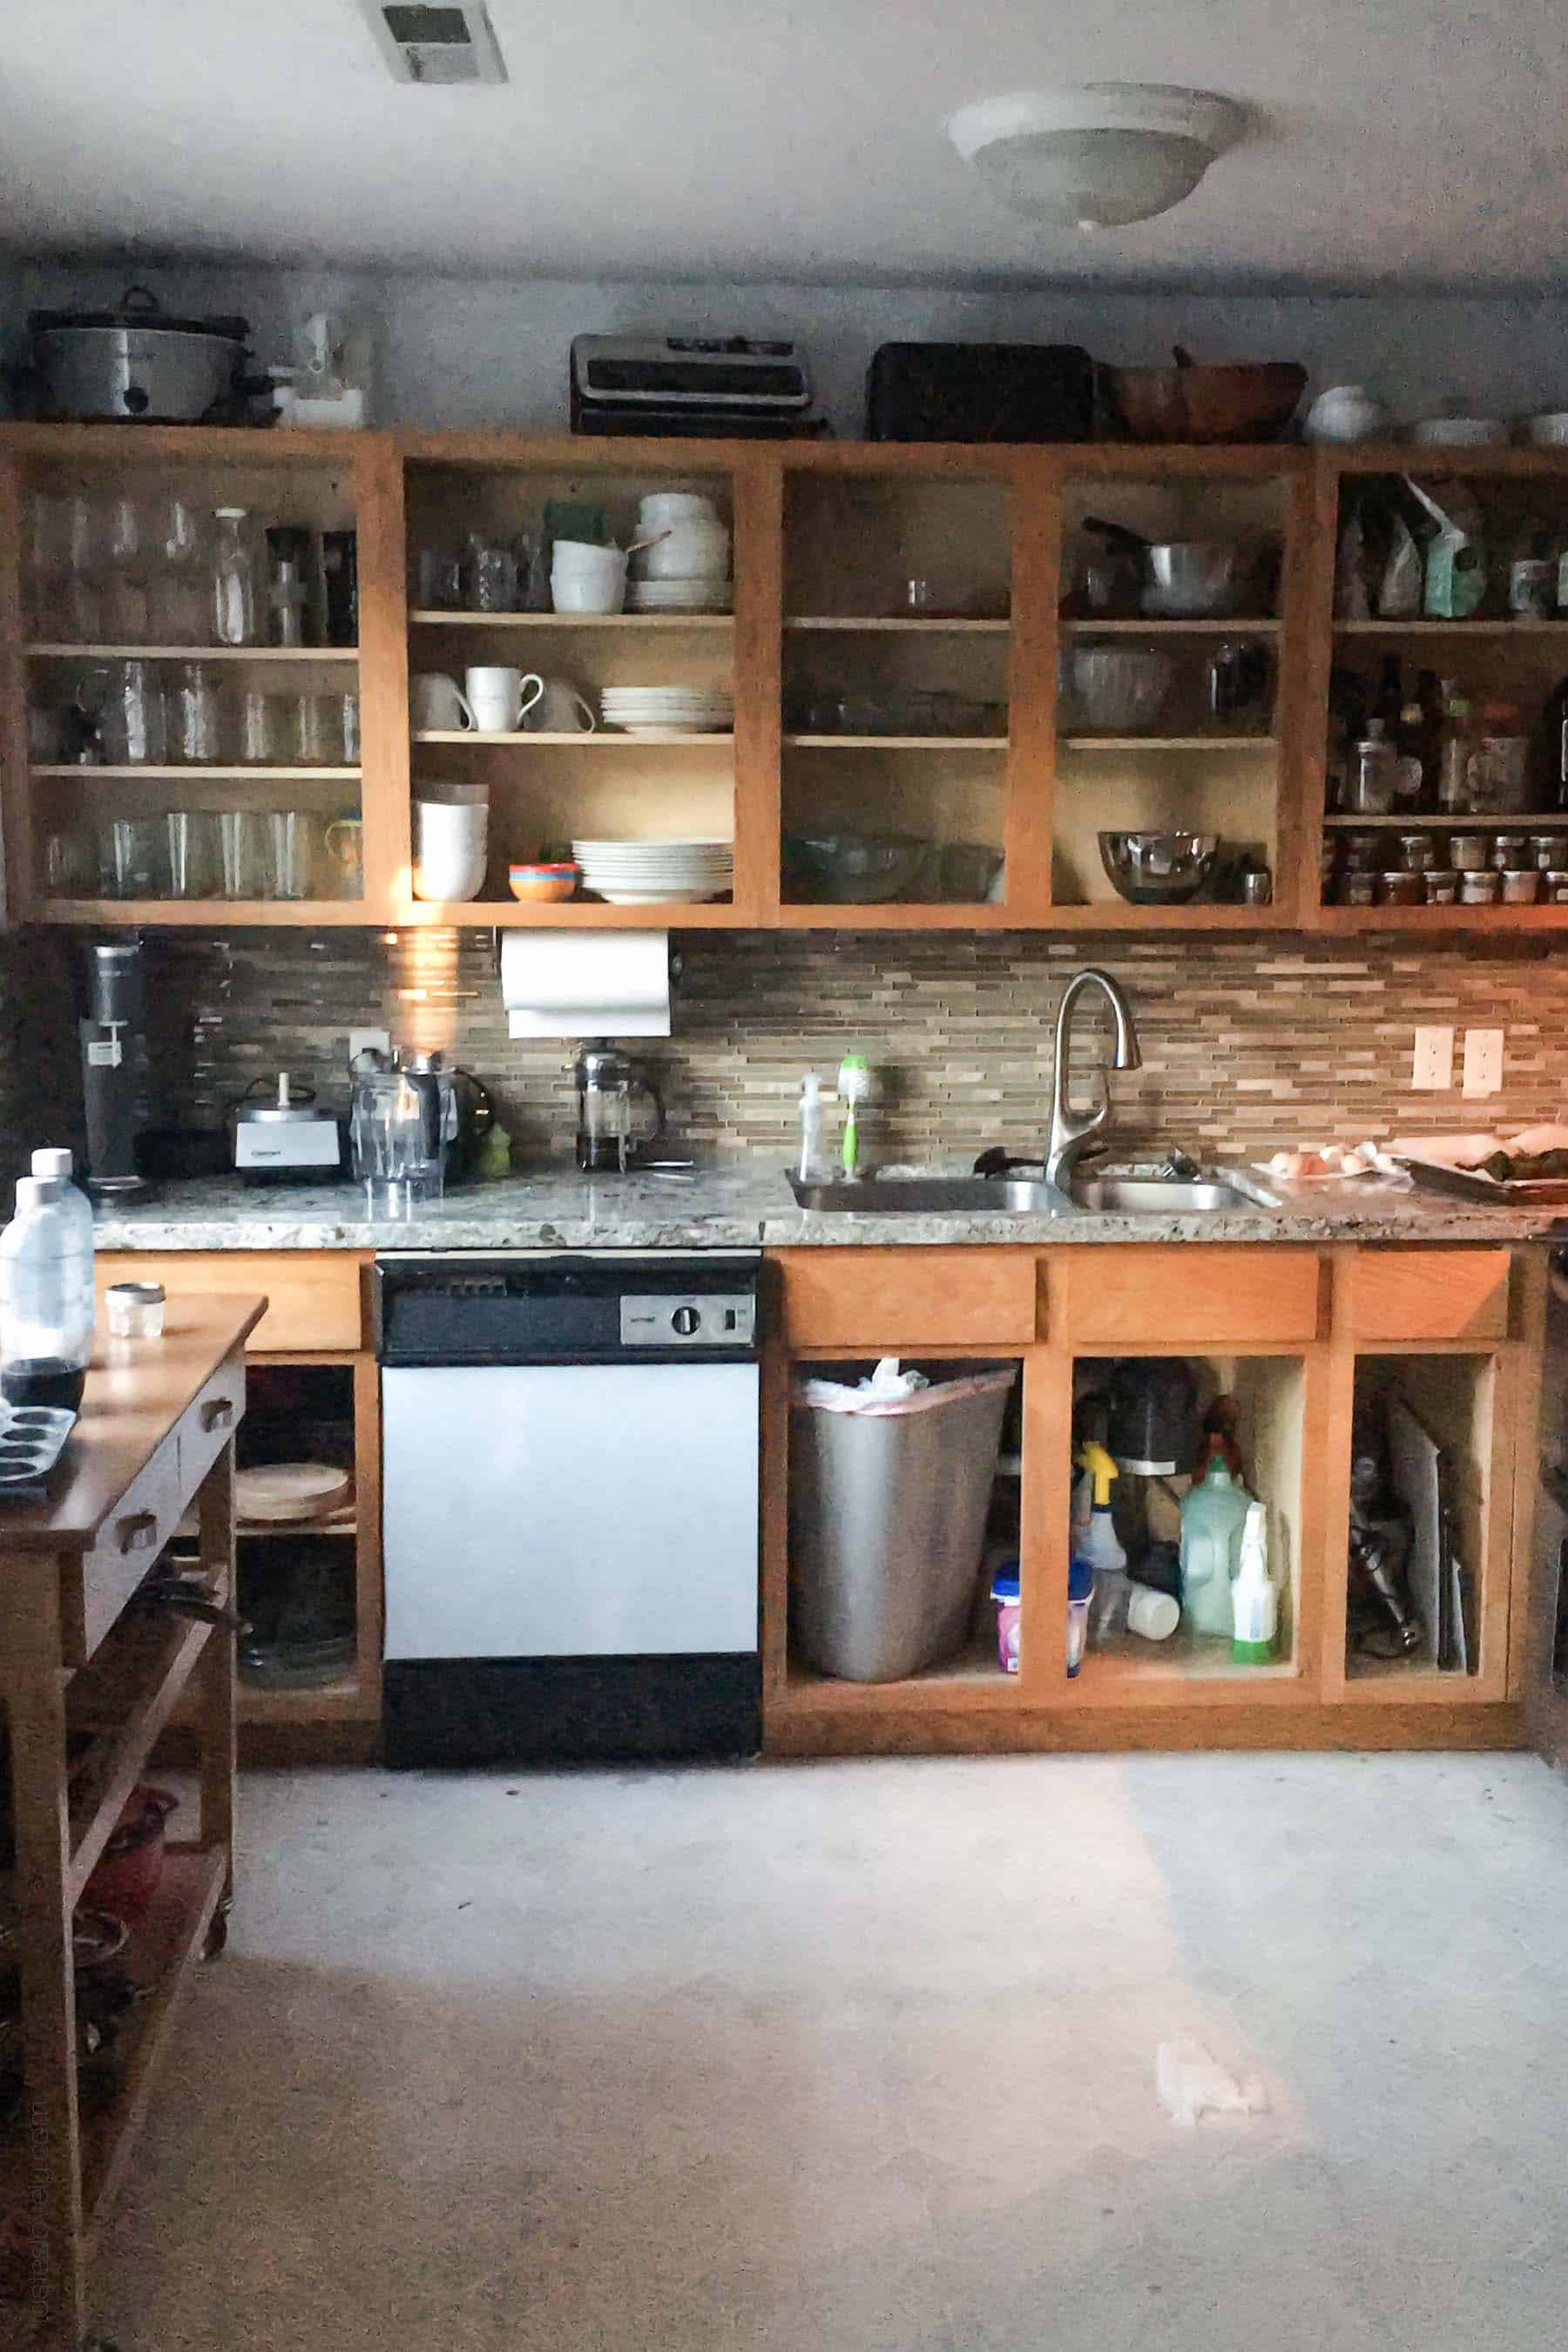 Our $281 DIY Kitchen Remodel - DIY painting oak cabinets white, adding wood trim to make shaker style cabinets, and adding hardware